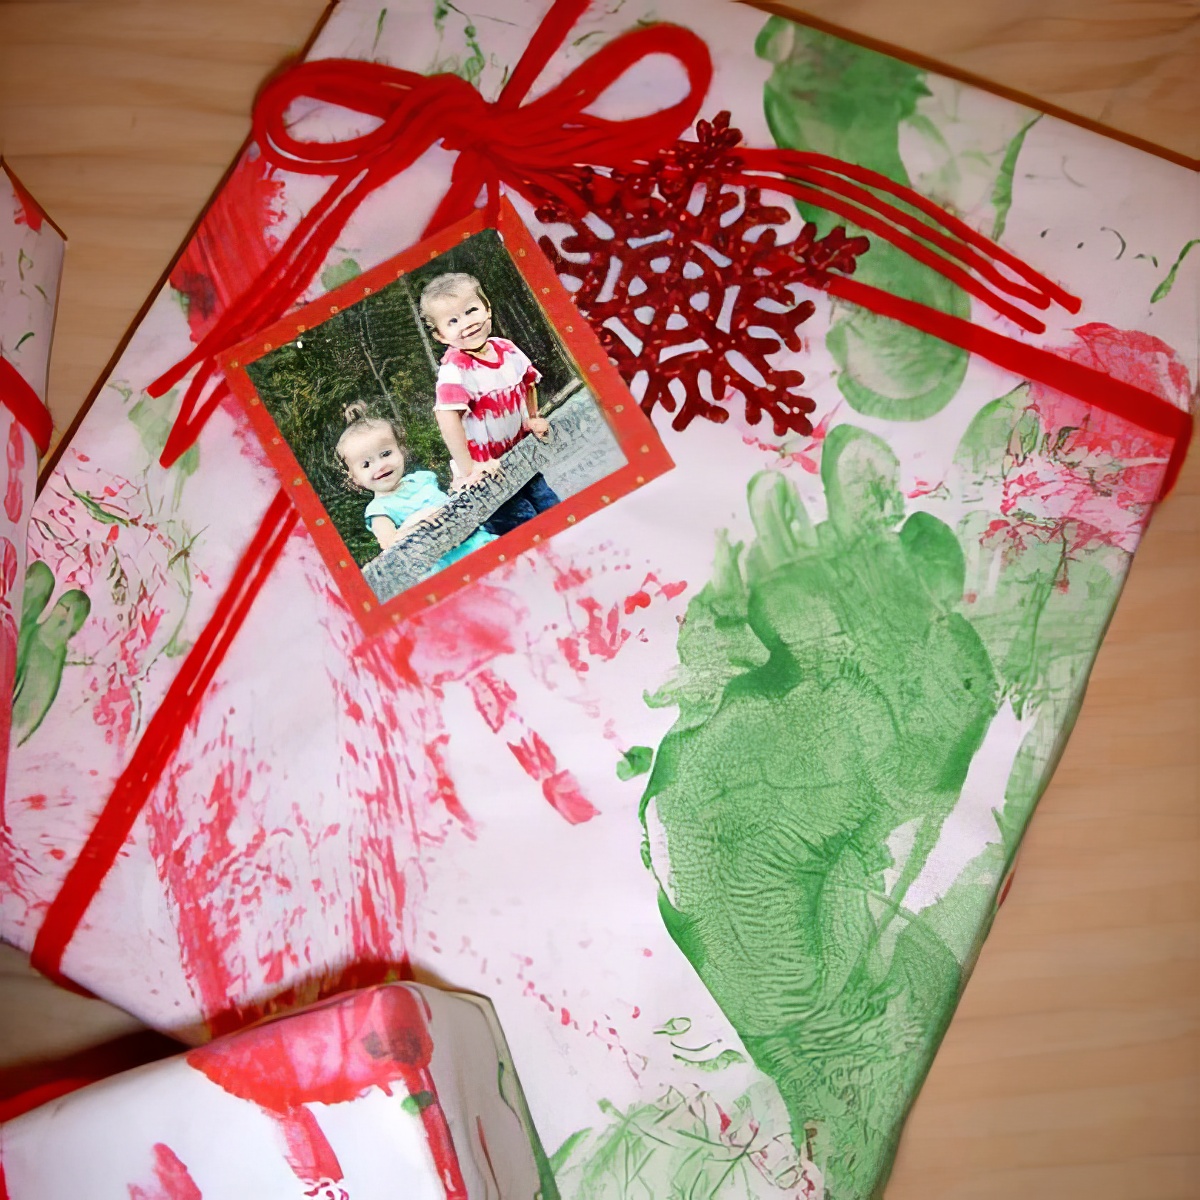 DIY that gift wrappers to be used this Christmas! Fun!